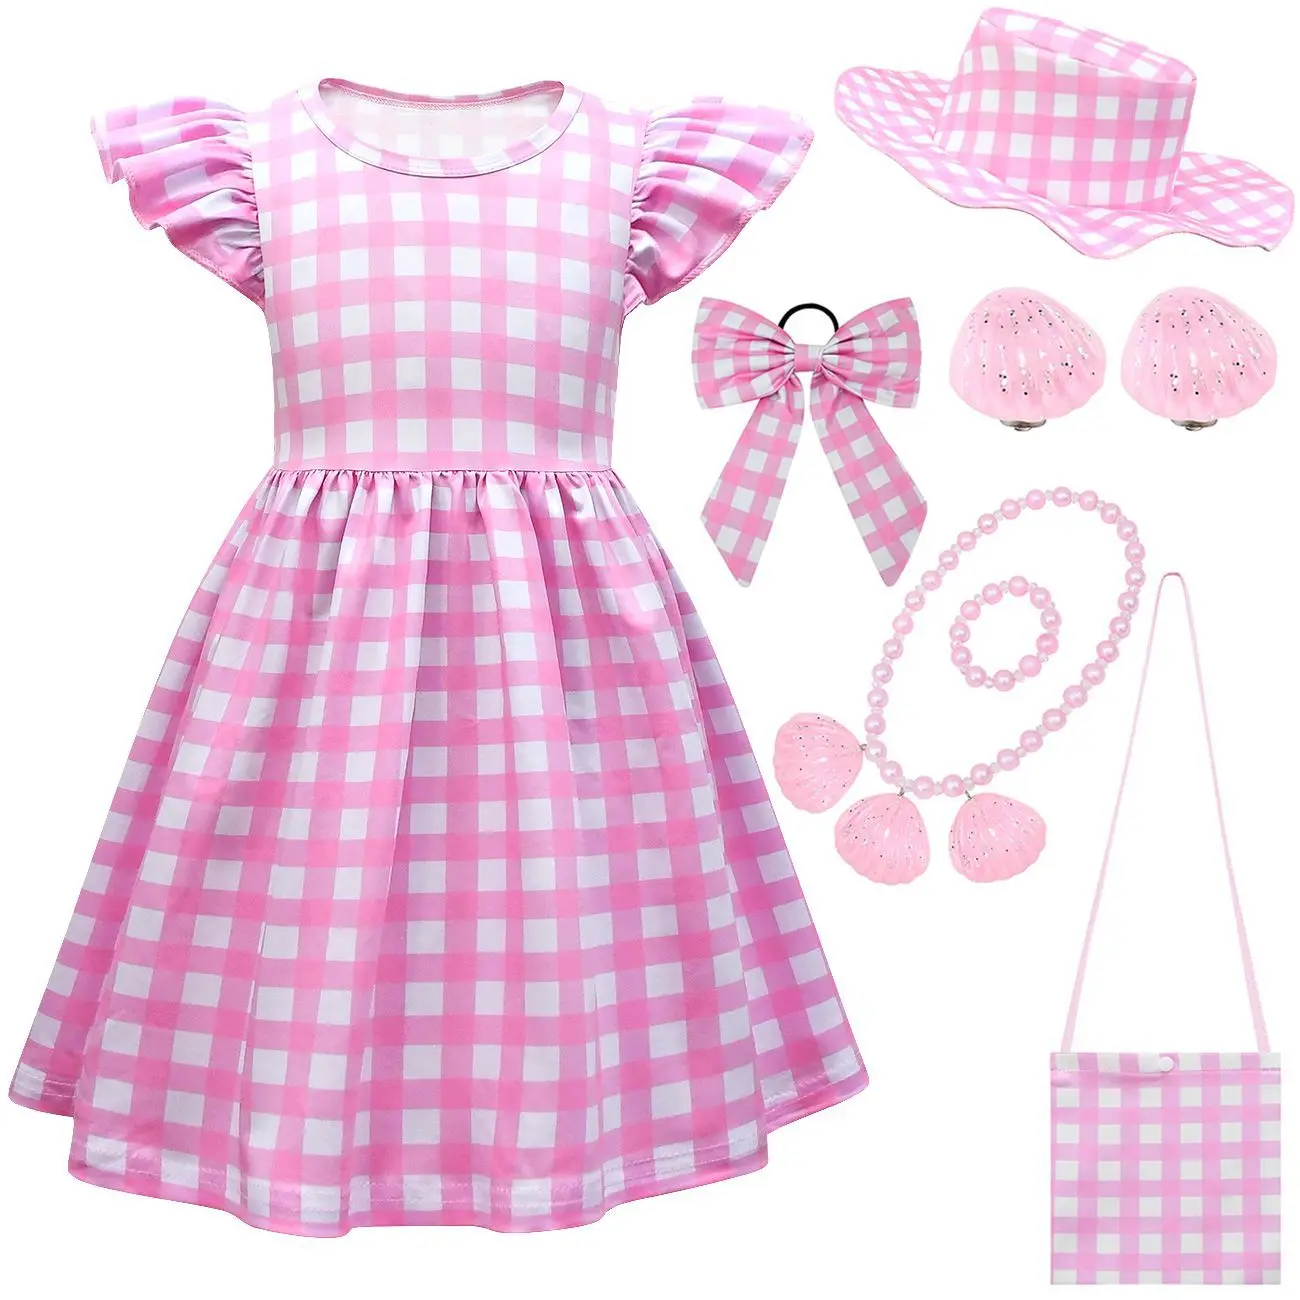 

2023 New Pink Dress Girl Cosplay Live Action Movies Dress Halloween Role Play Costumes Children's Masquerade Show dresses kids